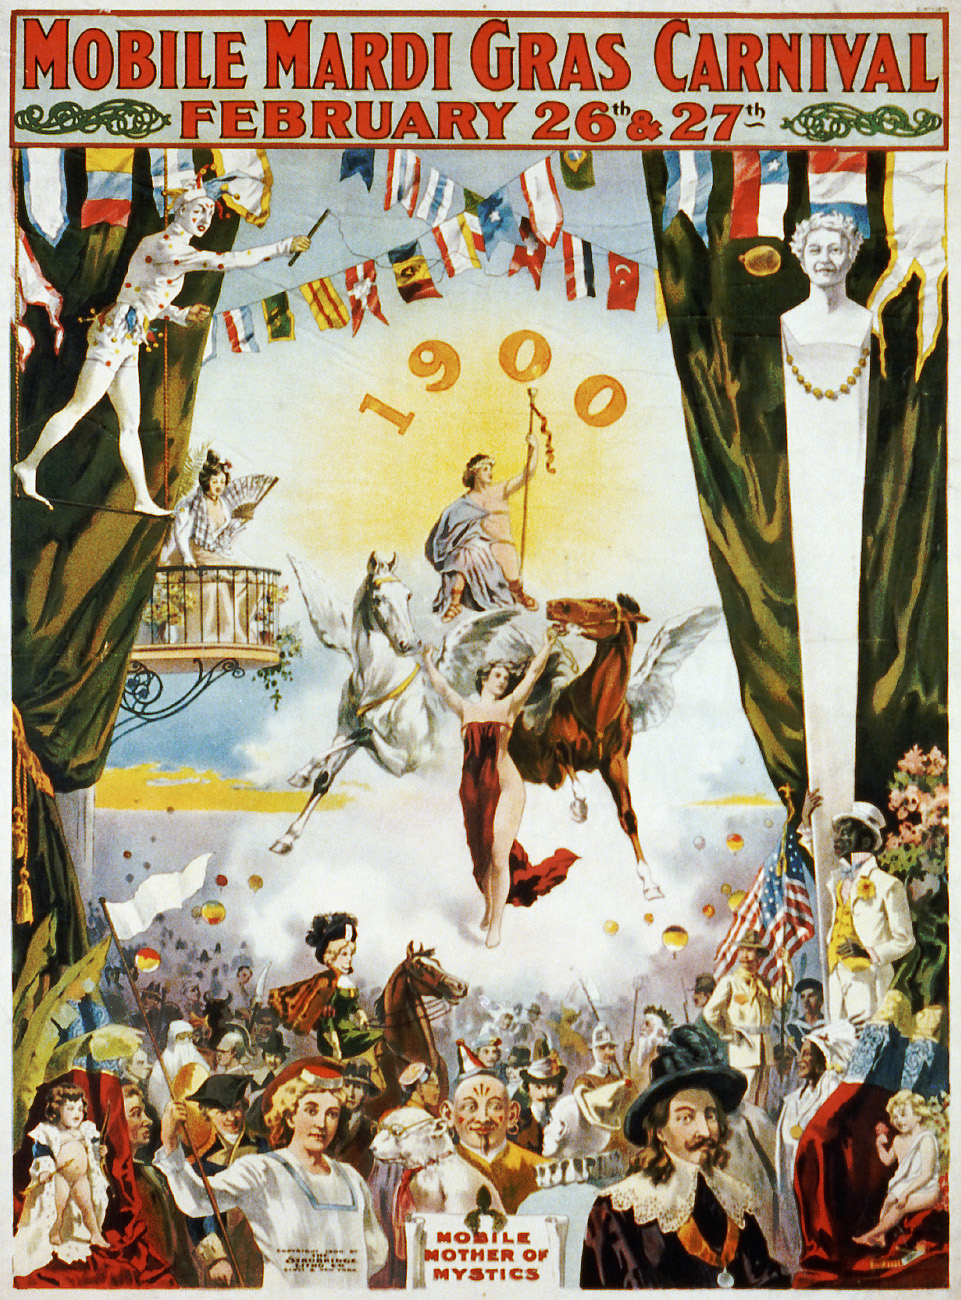 A poster for the 1900 Mardi Gras in Mobile, Alabama - the first in the nation.